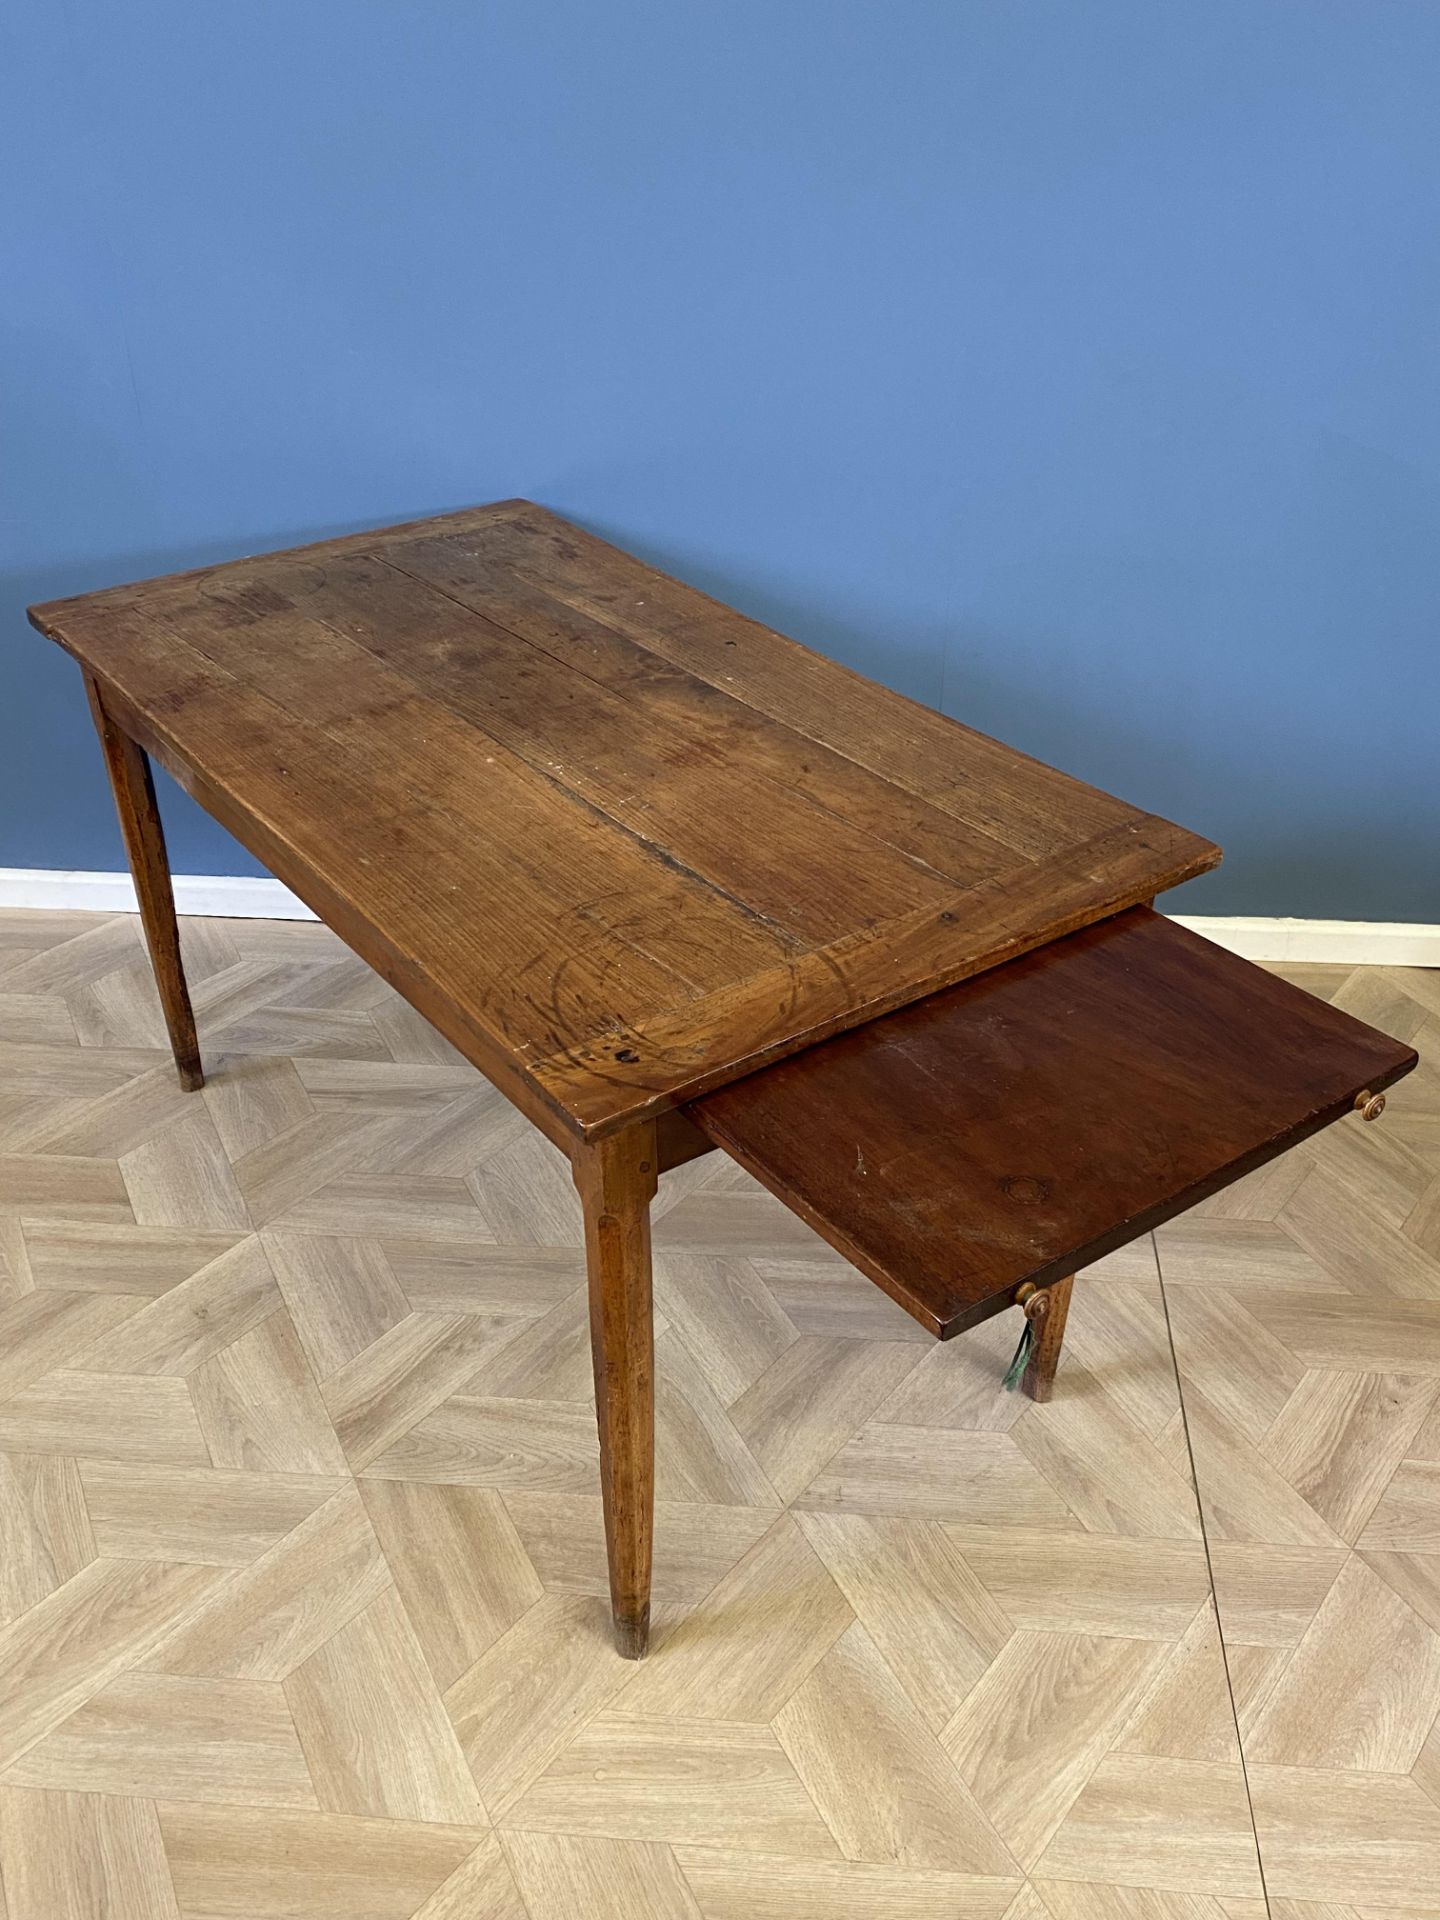 Early 19th century French fruitwood farmhouse table - Image 4 of 6